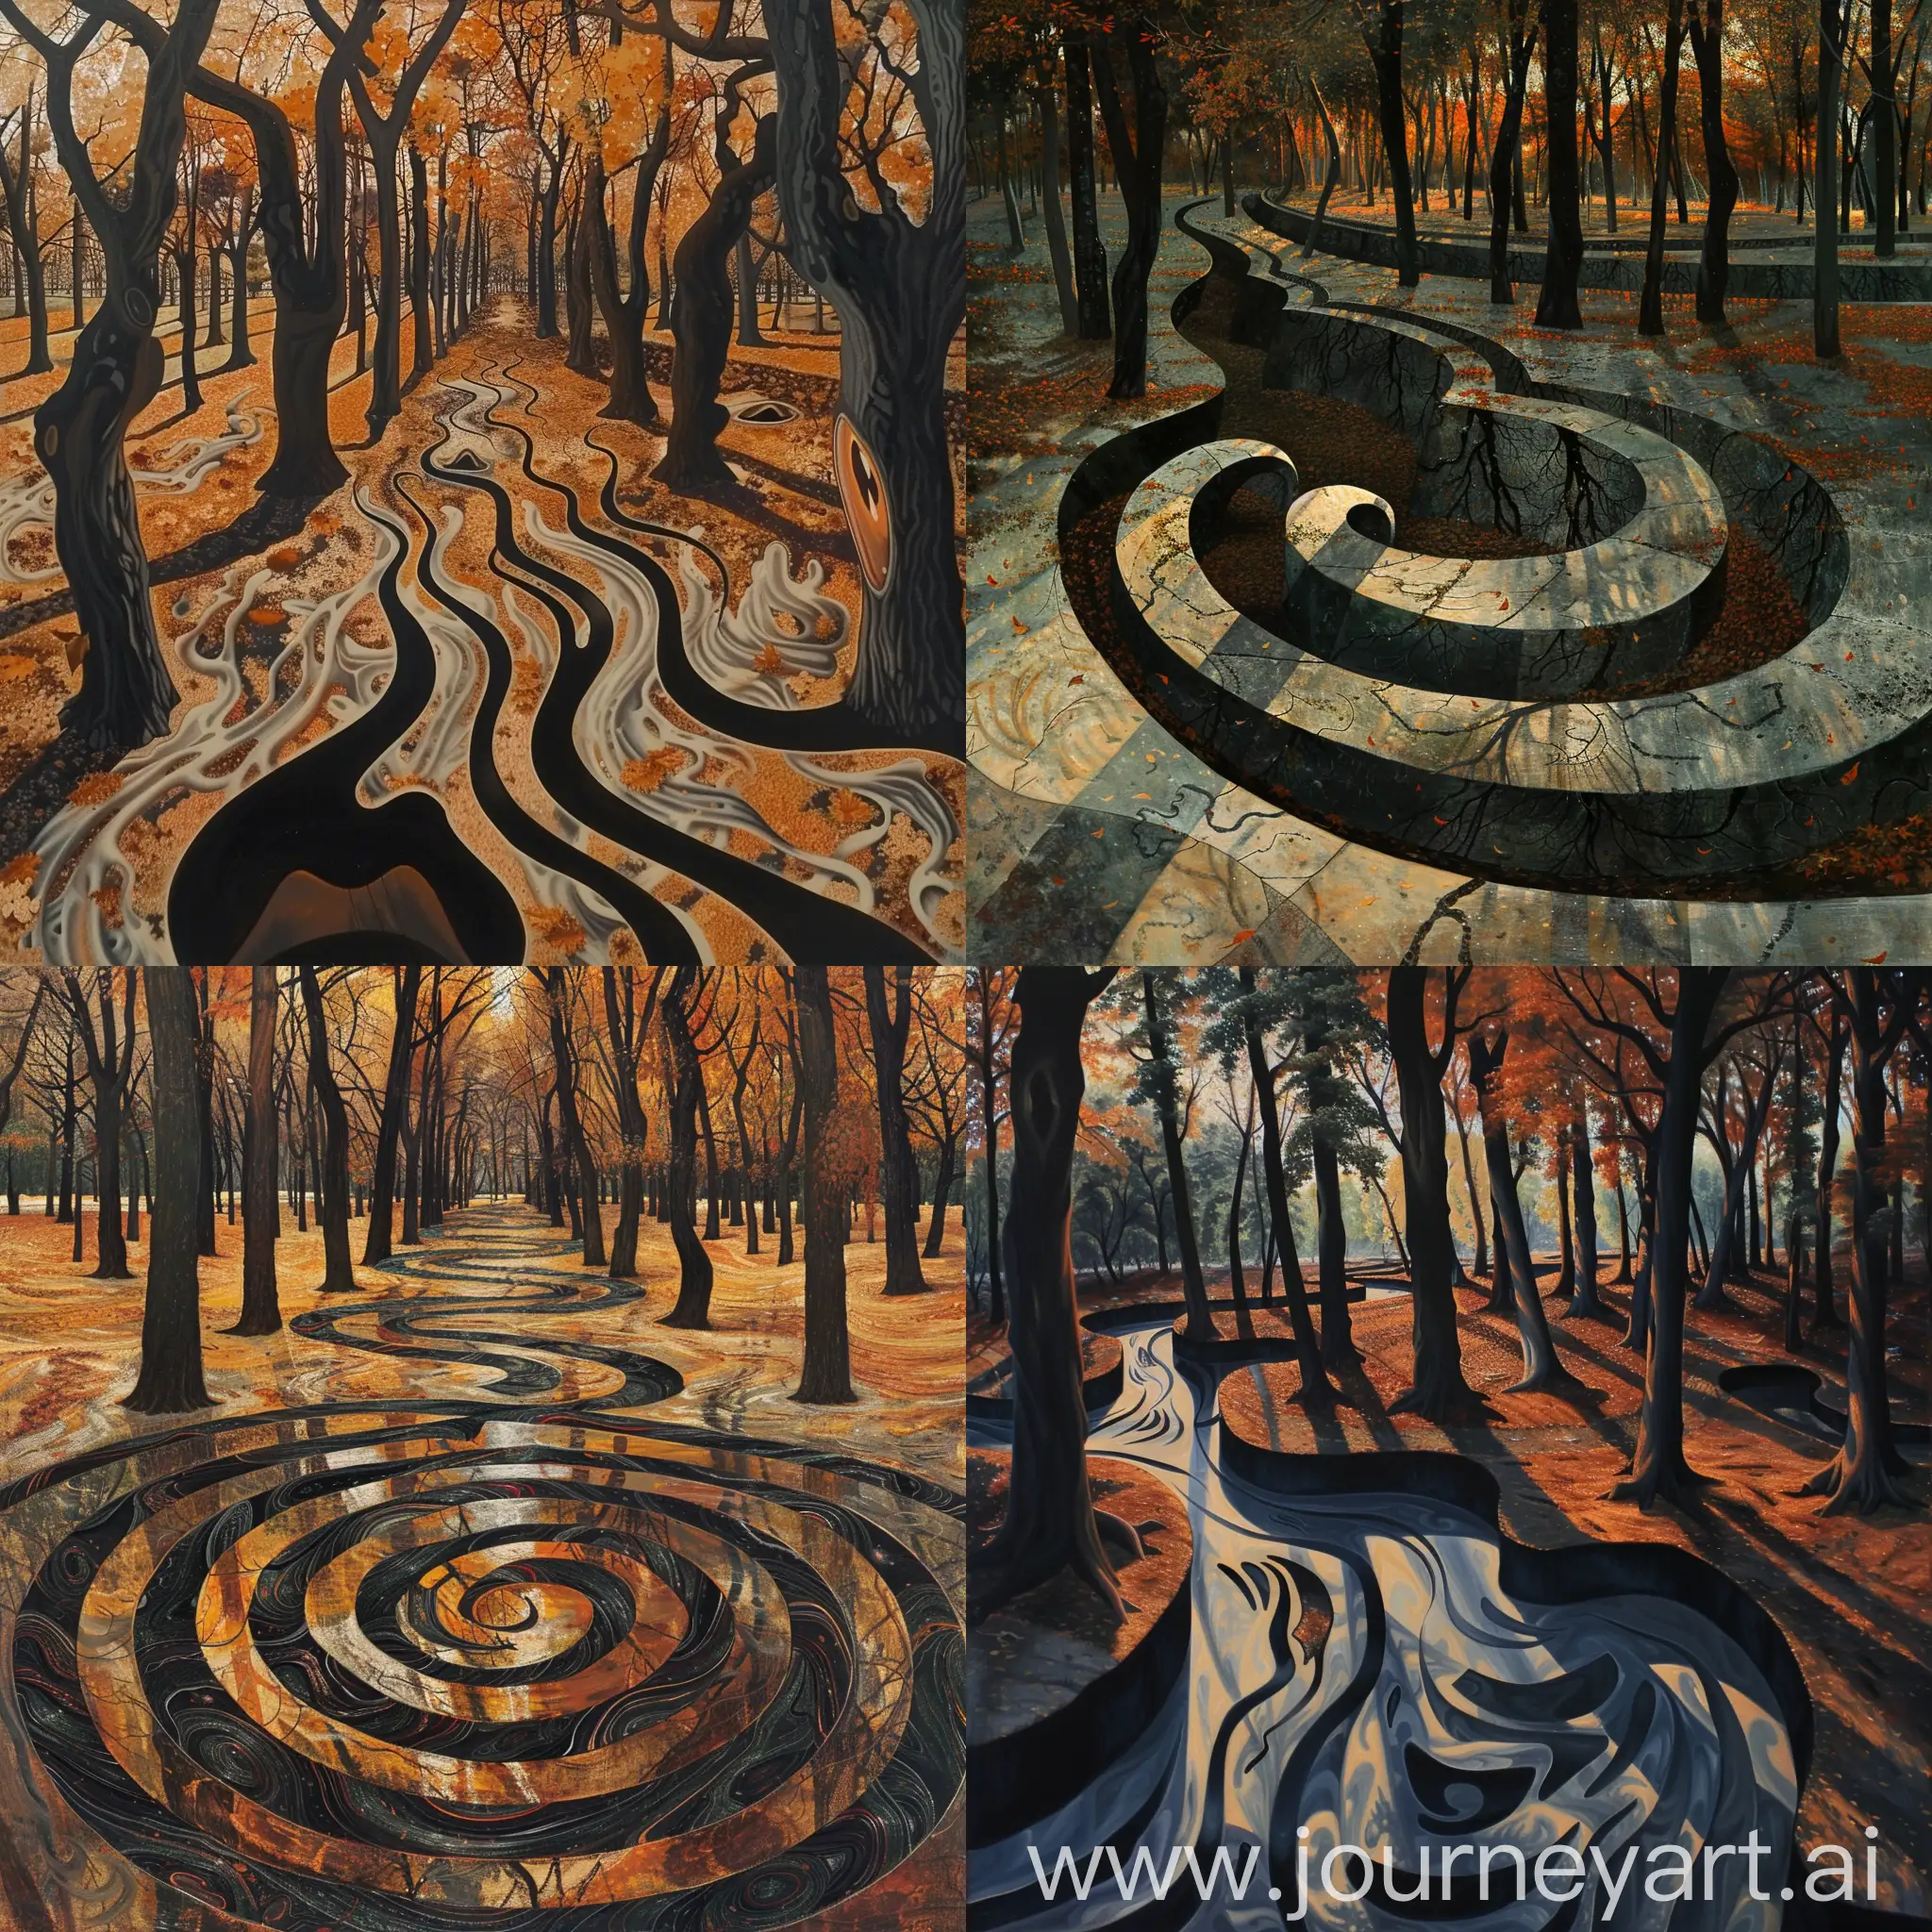 Autumn afternoon in the park with pus and dark colors in the style of surrealism and many trees and with many perspectives in the style of Scream painting.